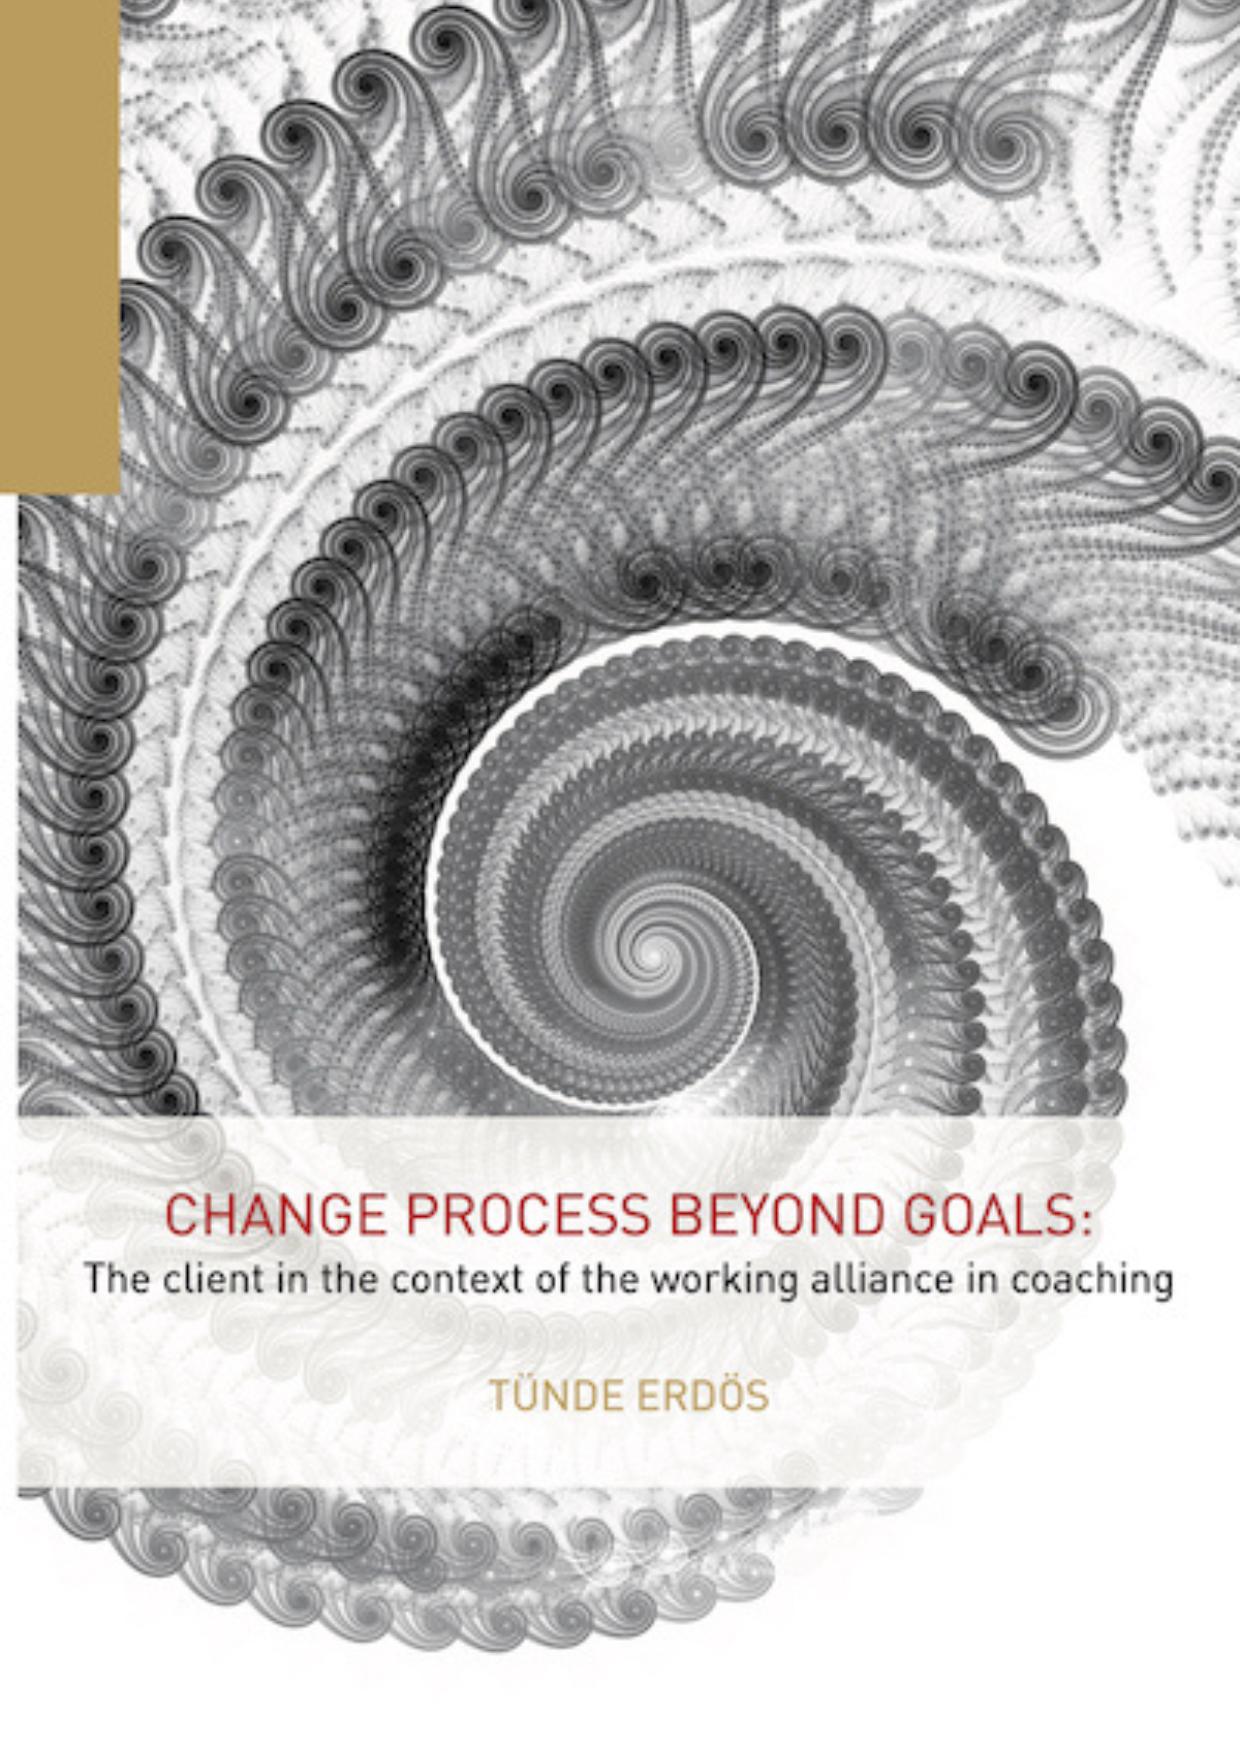 Change beyond goals the client in the context of the working alliance in coaching